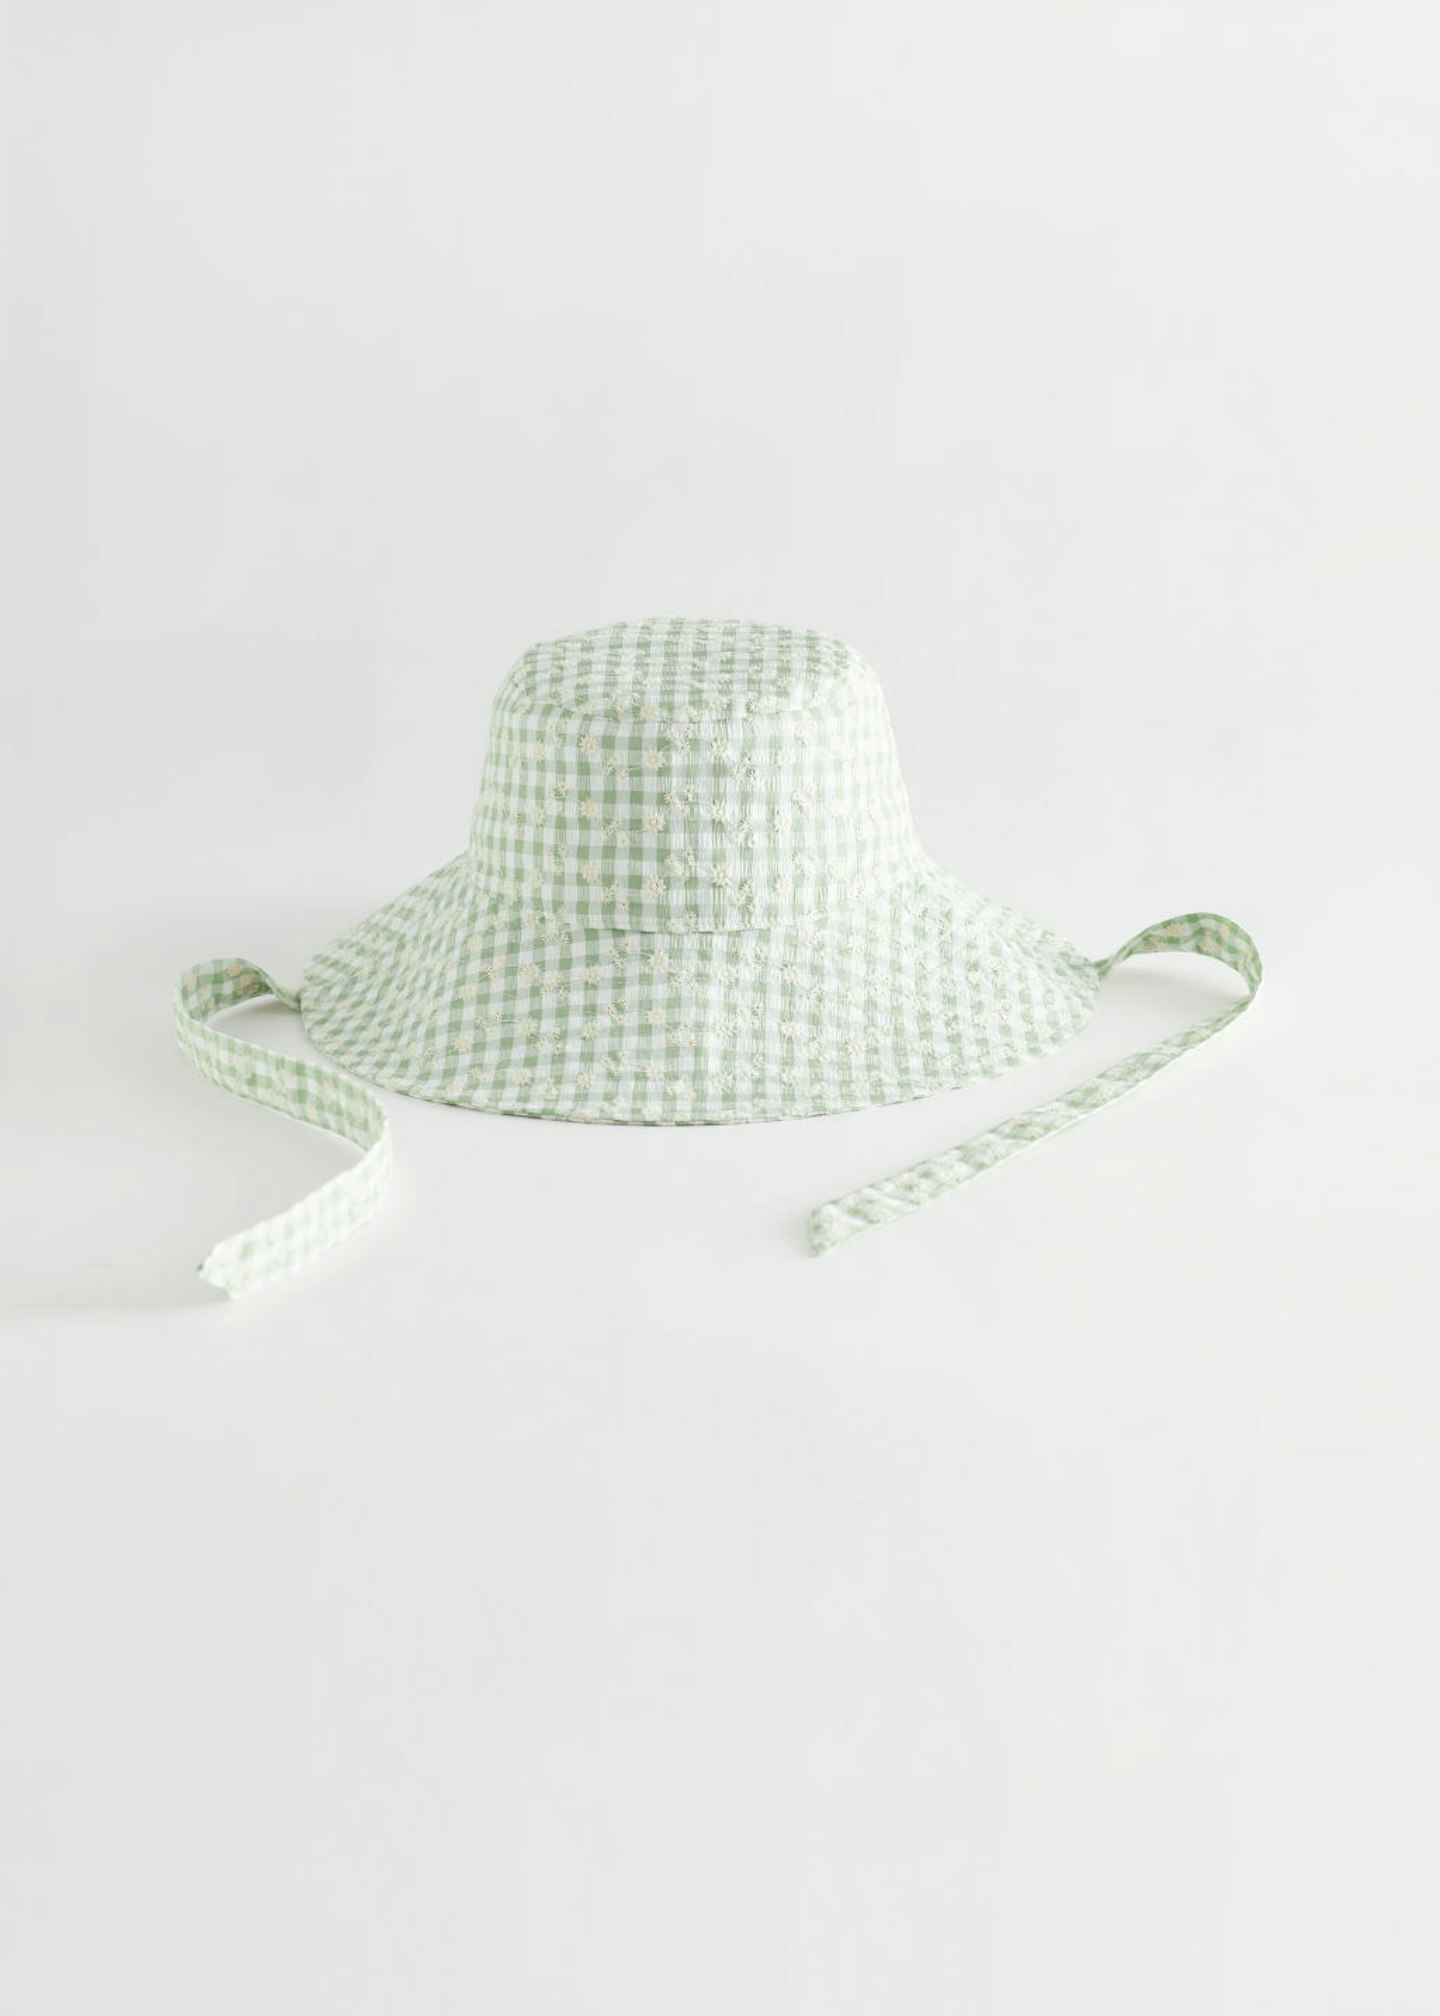 & Other Stories, Floral Gingham Ribbon Tie Bucket Hat